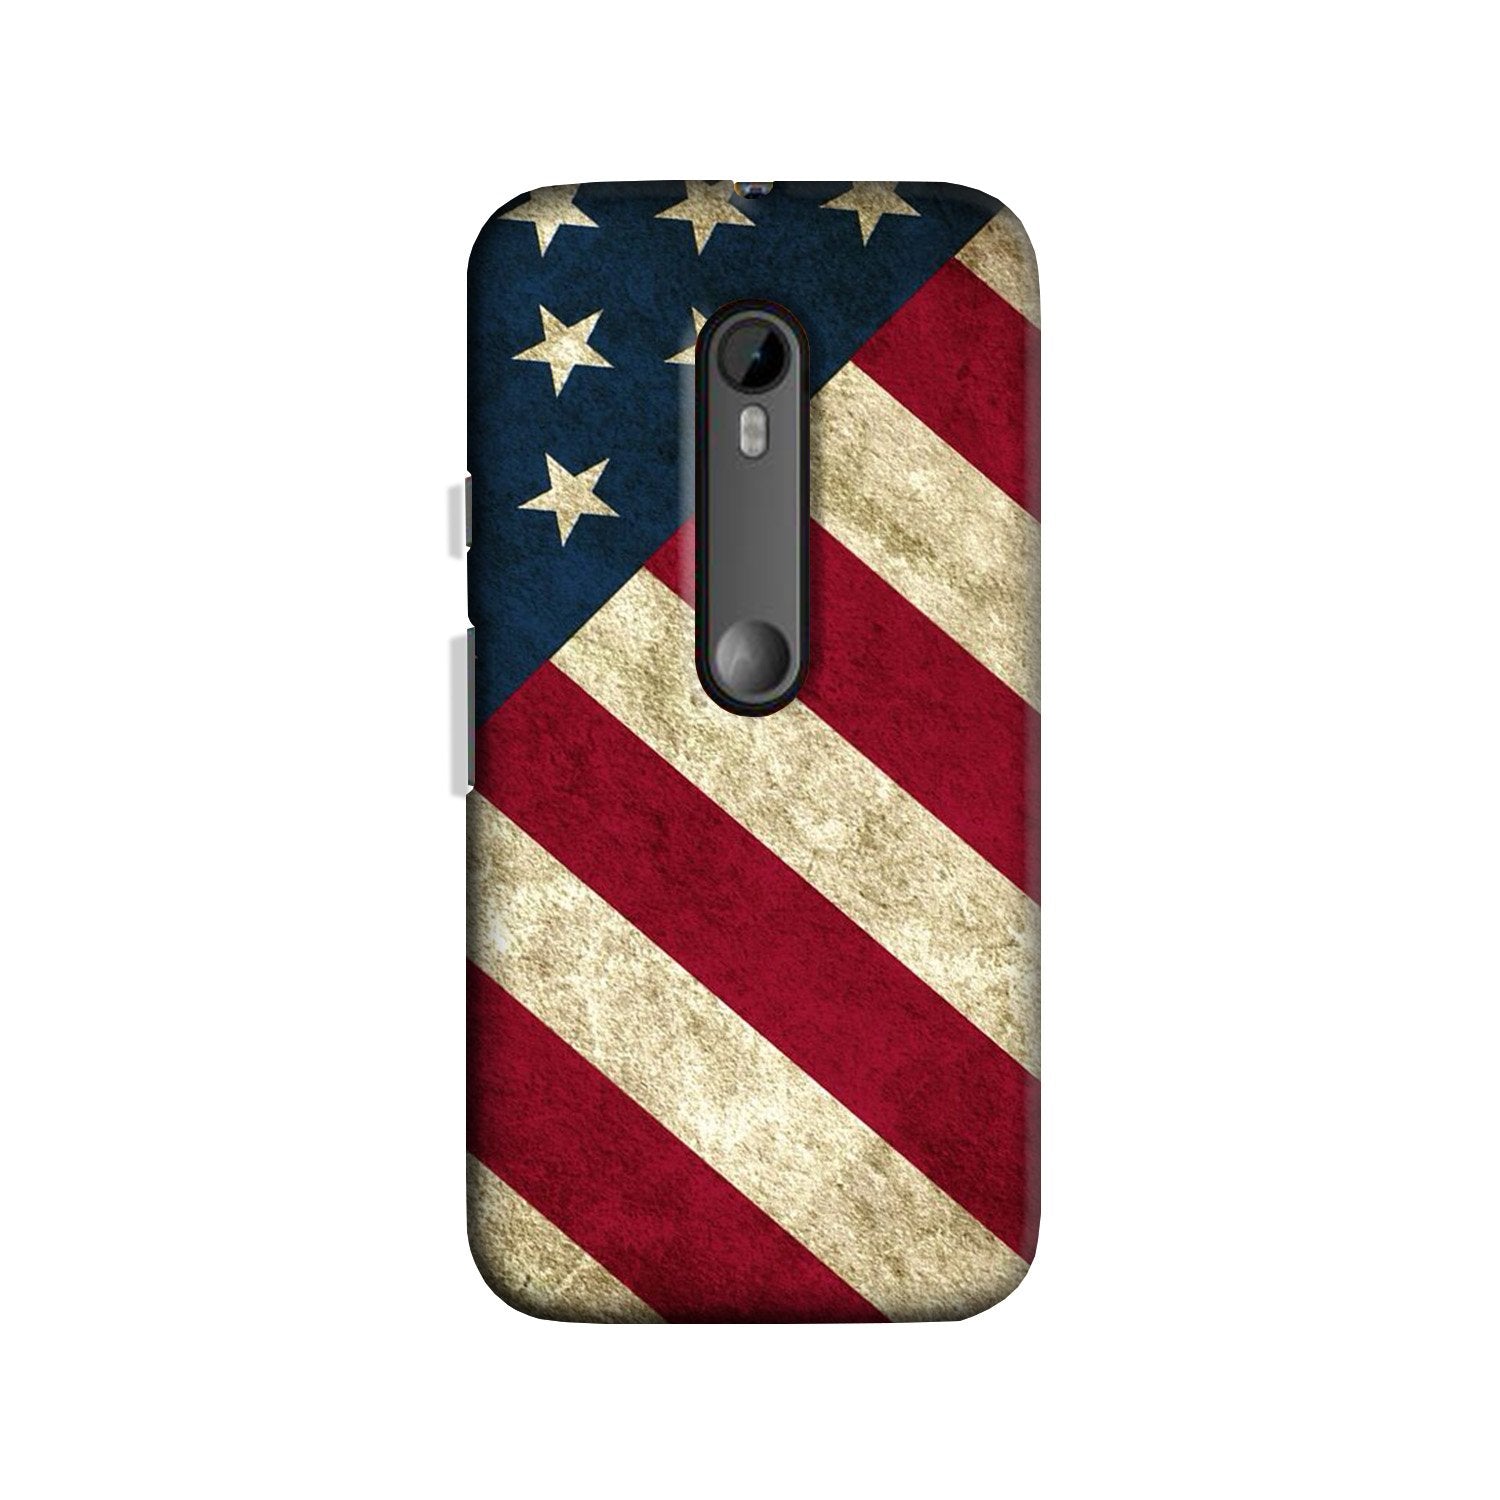 America Case for Moto X Force